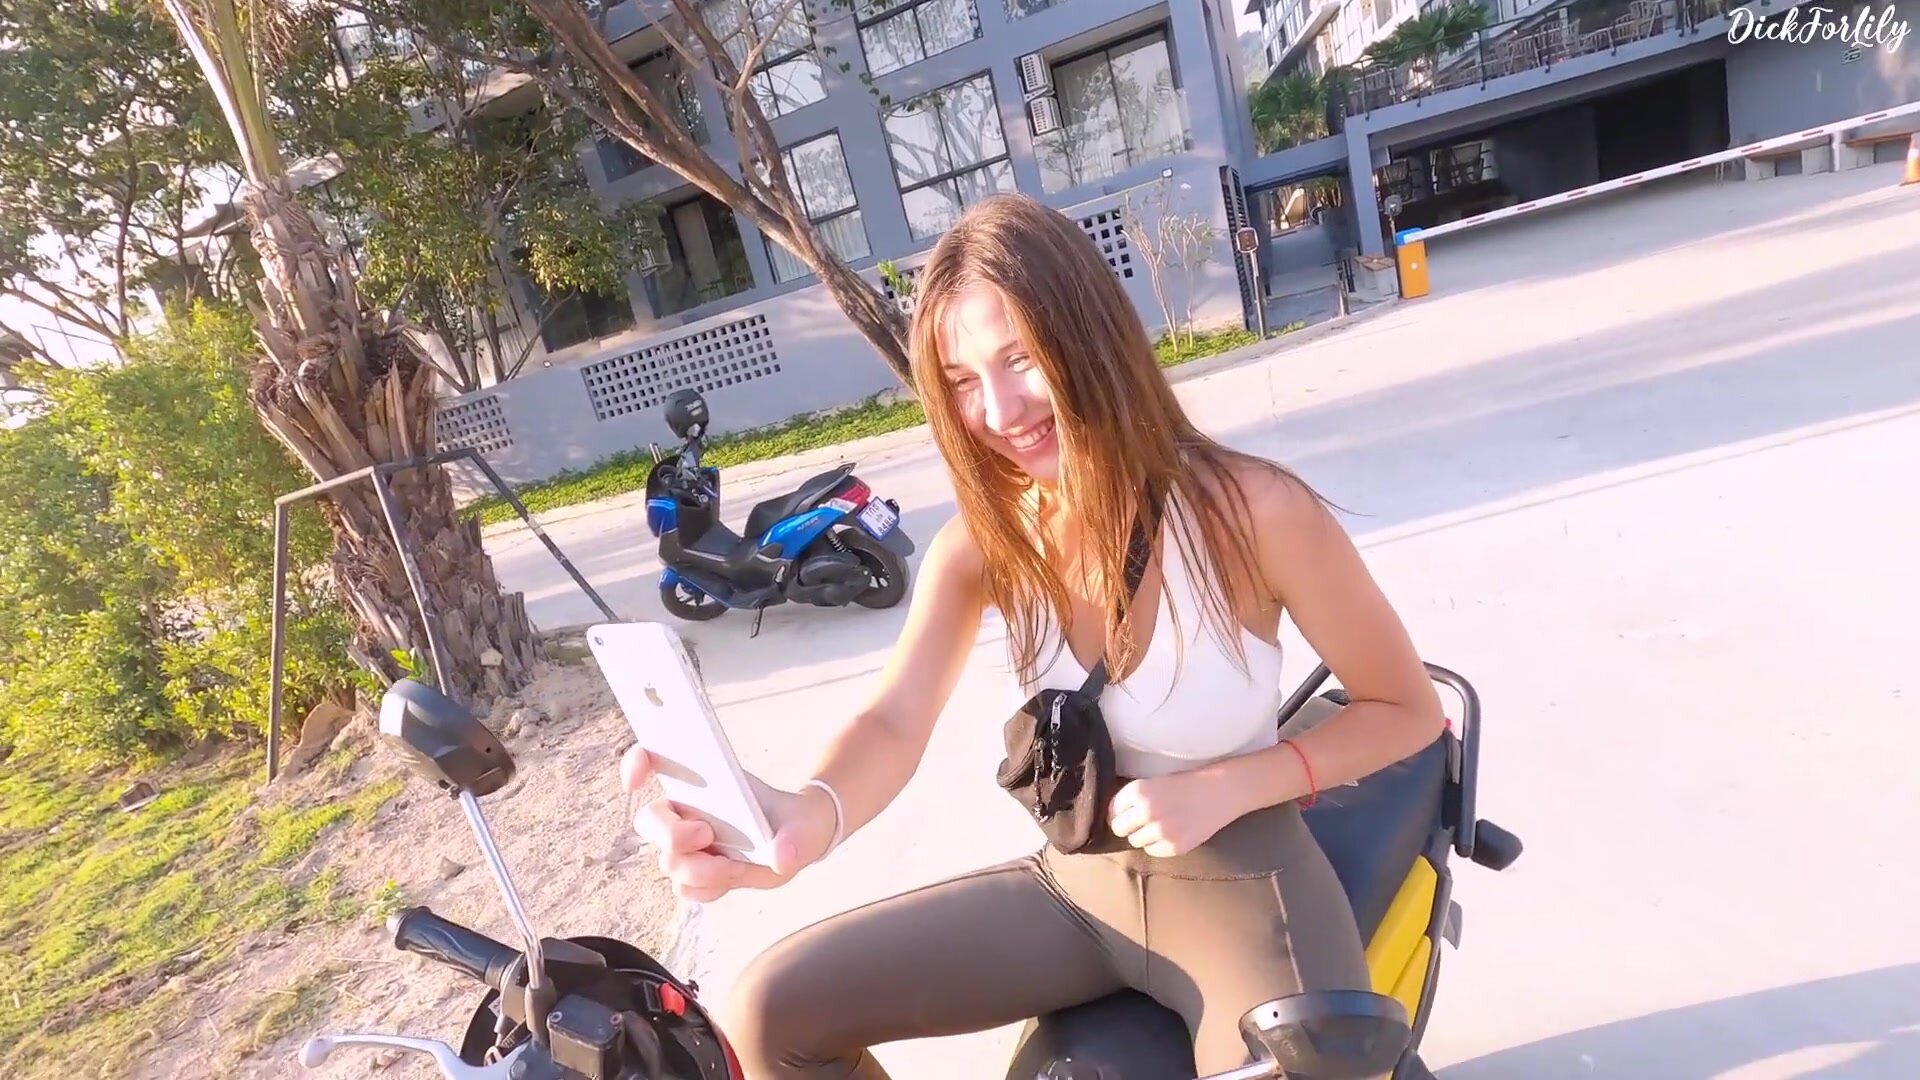 DickForLily - Tourist Fell for My Motorbike and Got Hot